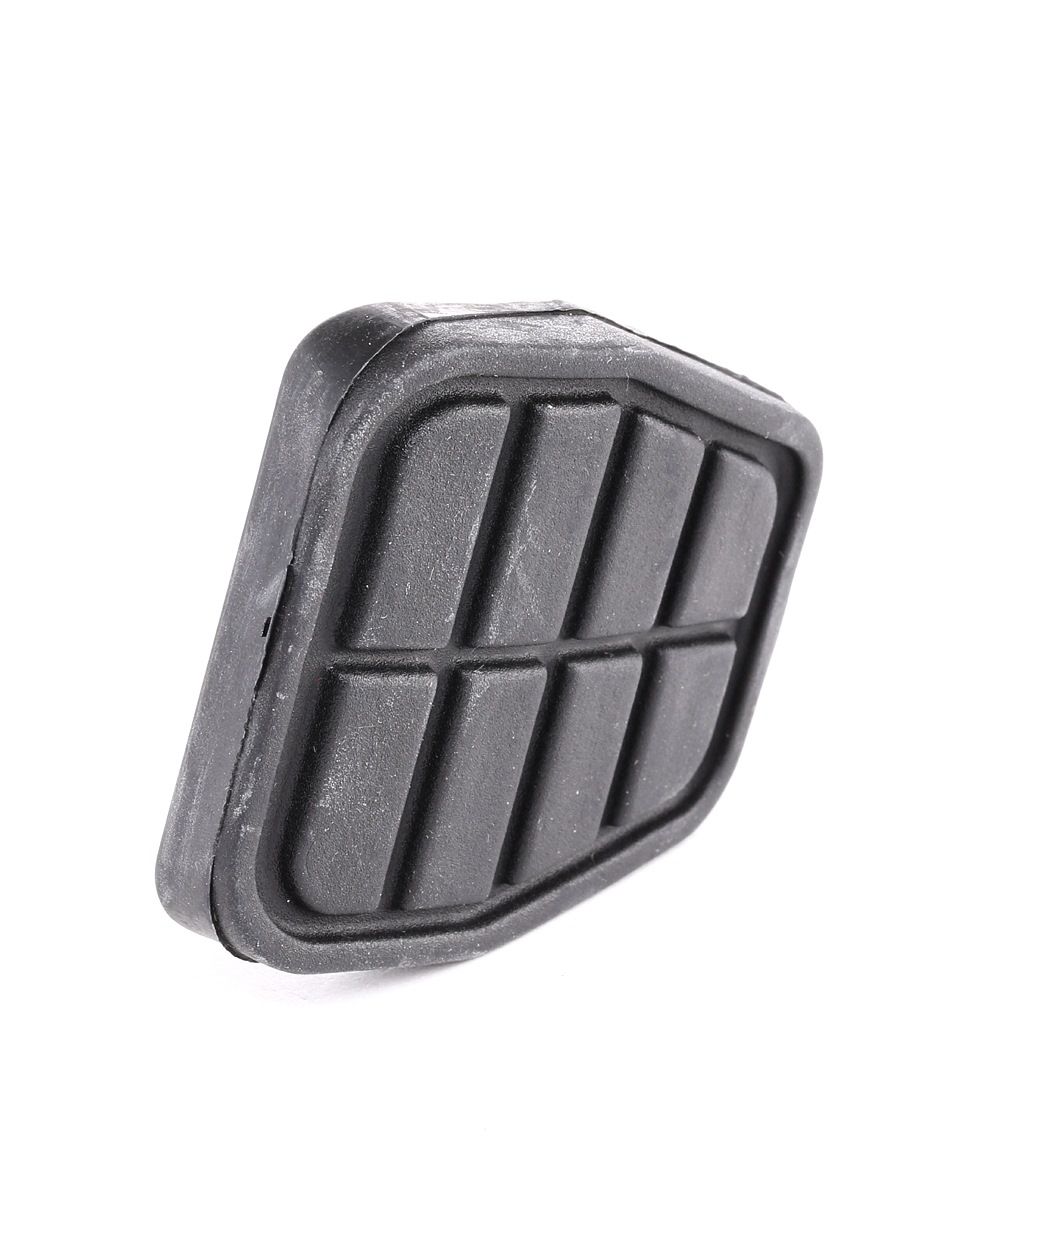 Great value for money - SWAG Brake Pedal Pad 99 90 5284